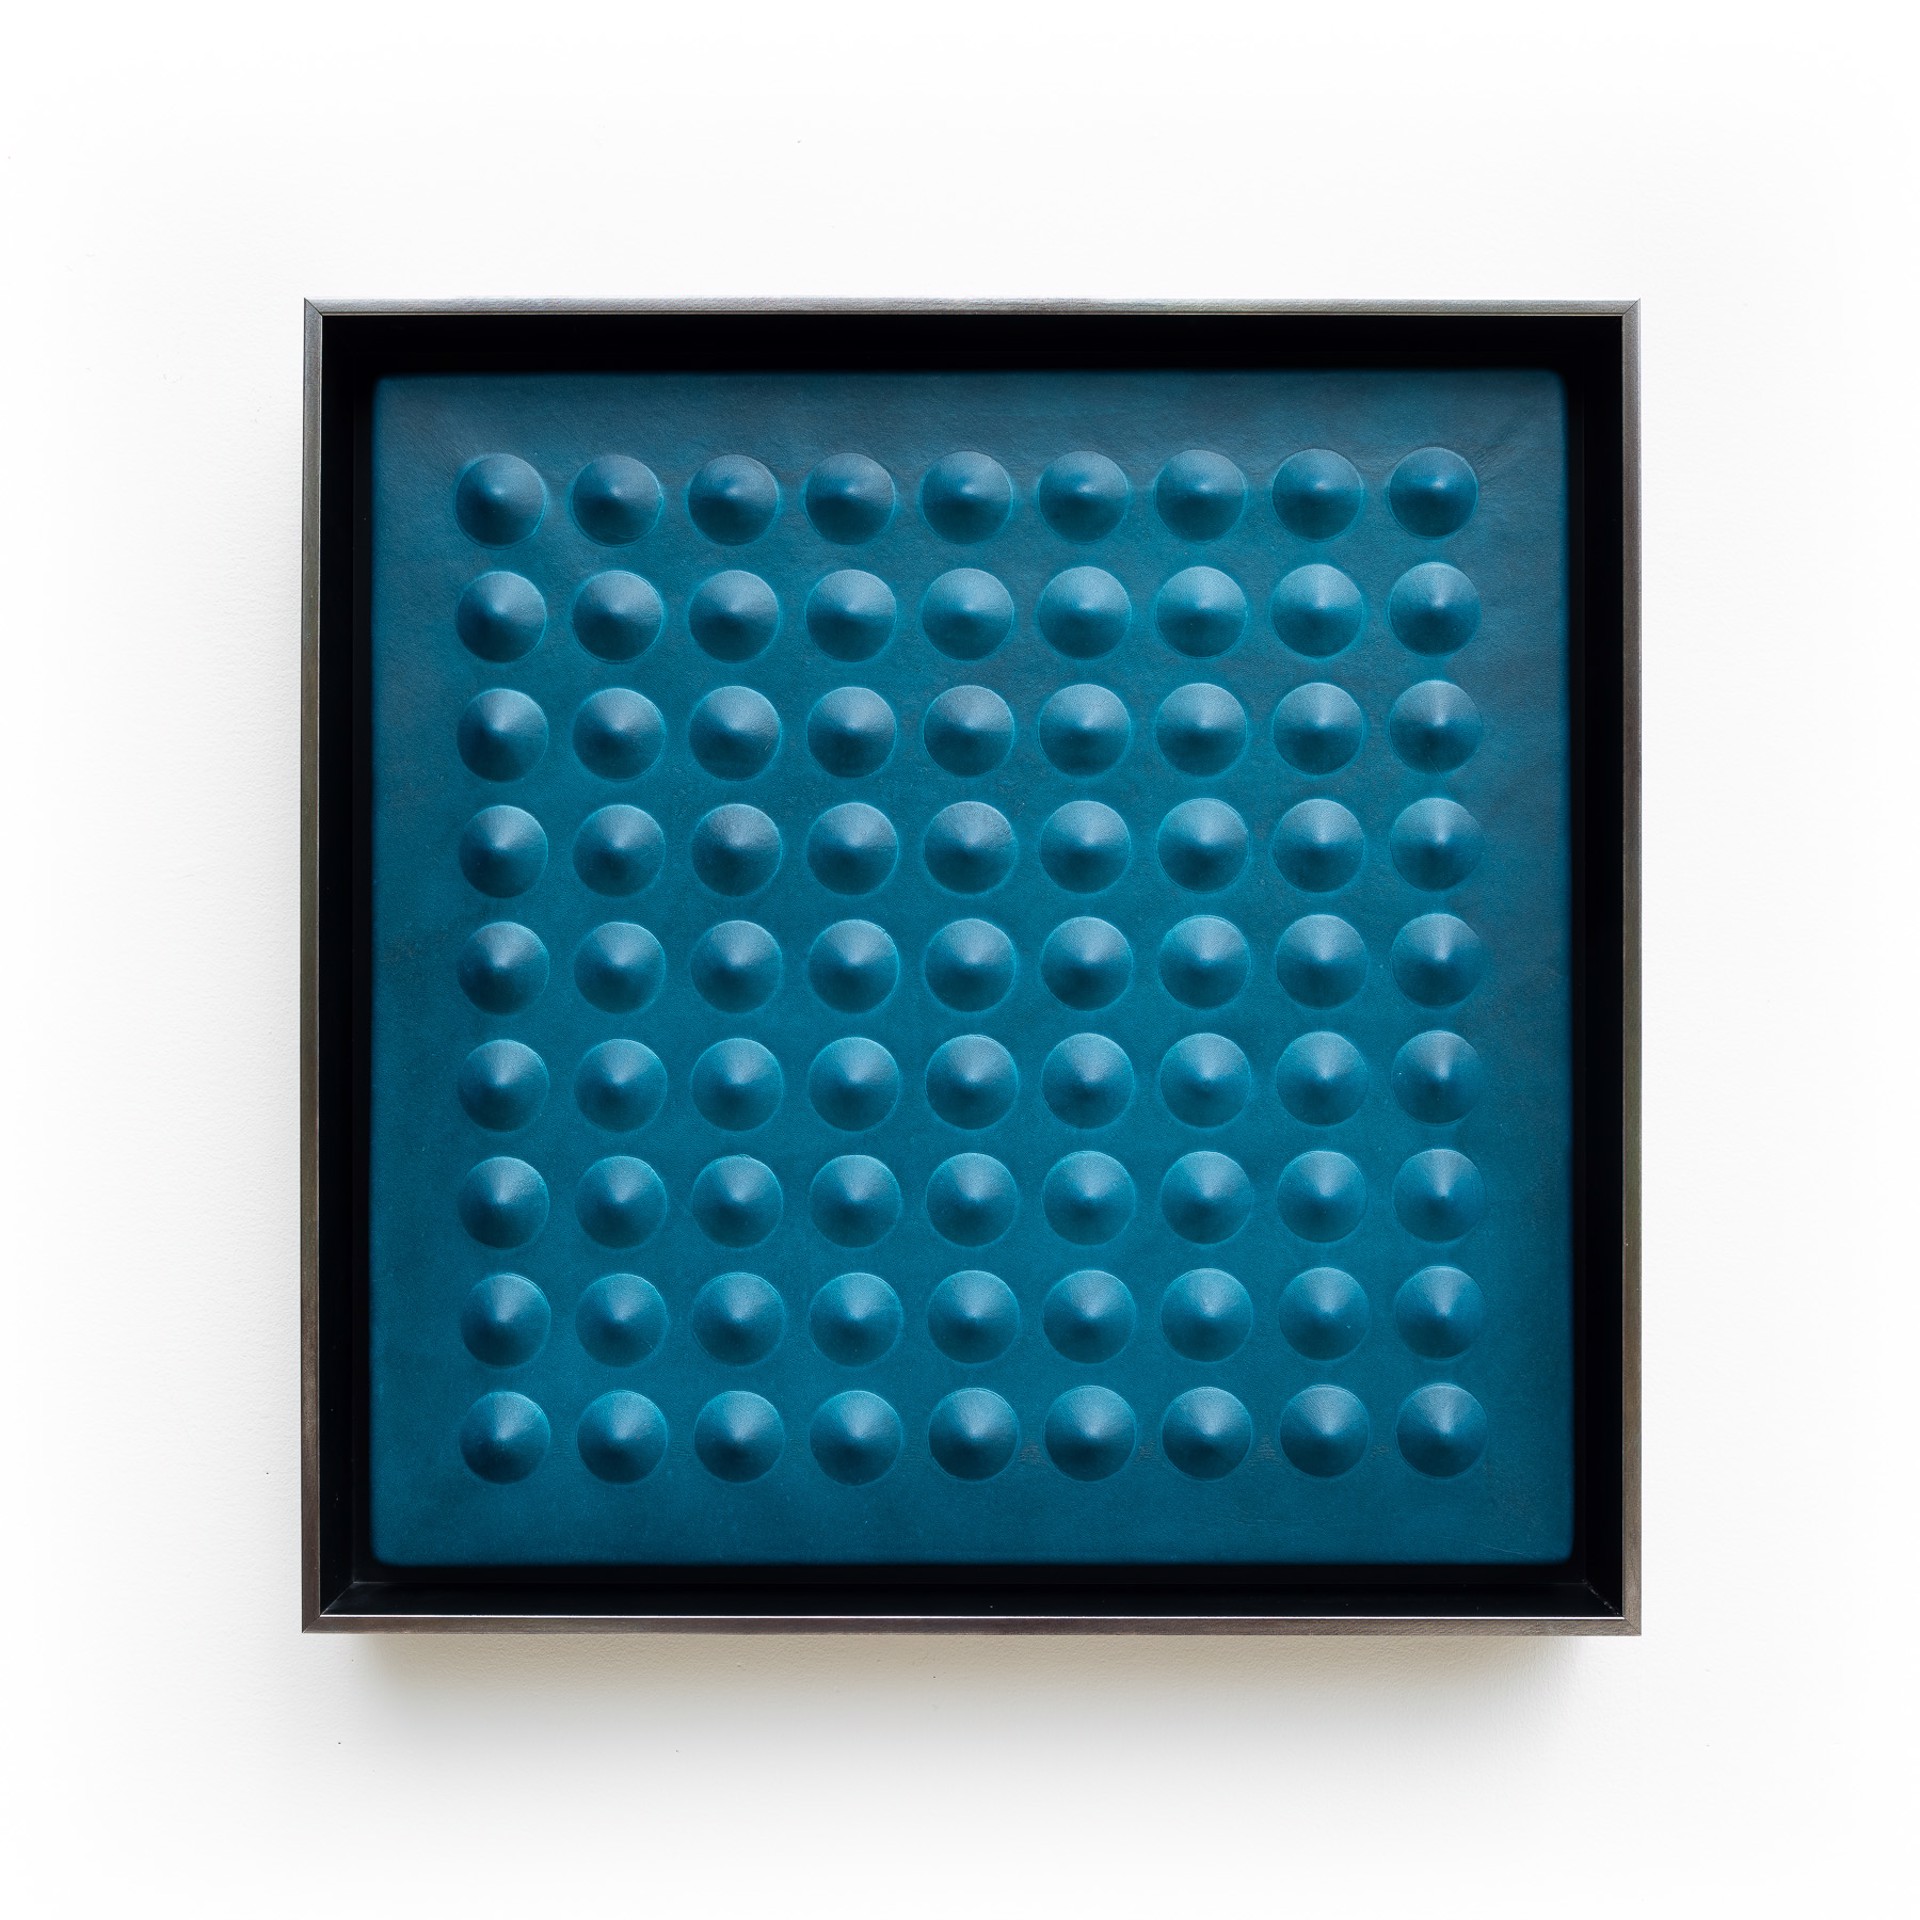 'Square (Teal)' - Sexy Stud series by Mx. Hyde